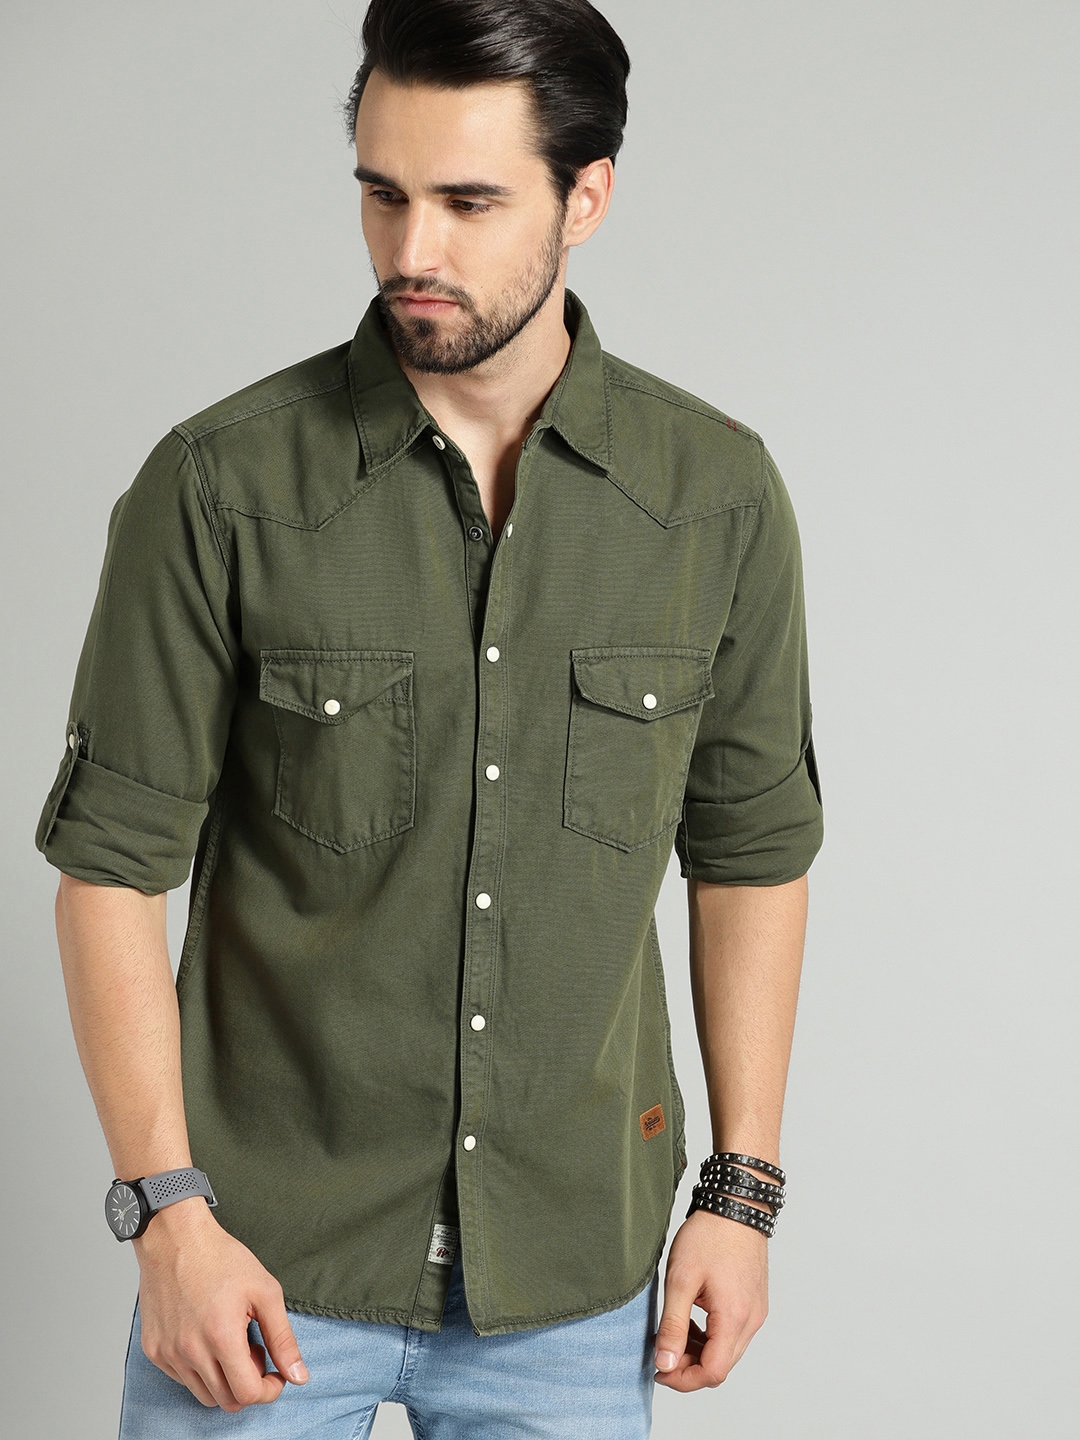 Buy Roadster Men Olive Green Regular Fit Solid Sustainable Casual Shirt ...